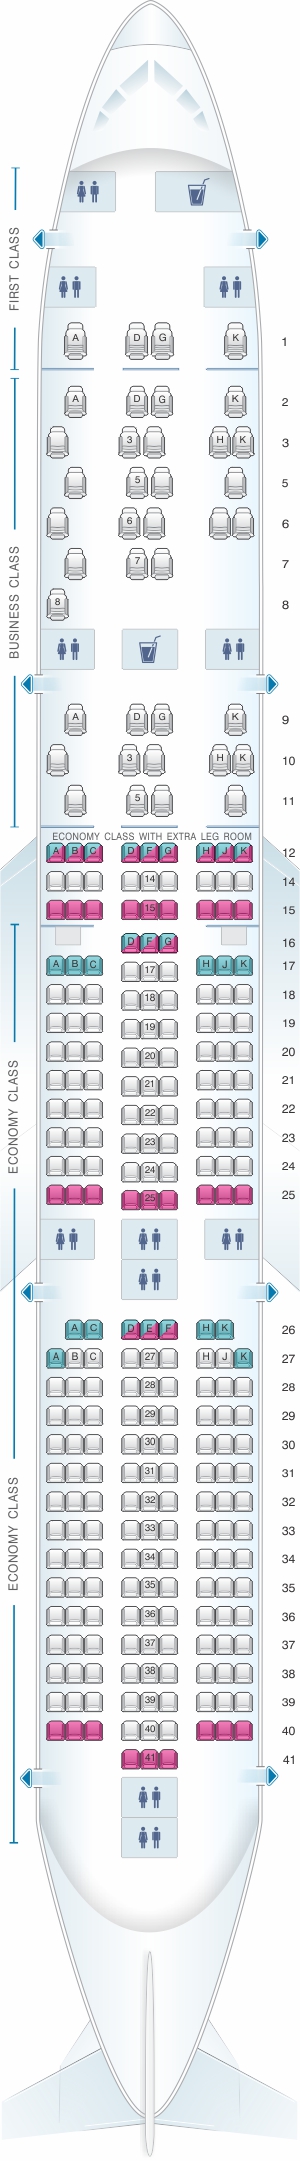 singapore airlines seat map airbus a350 900